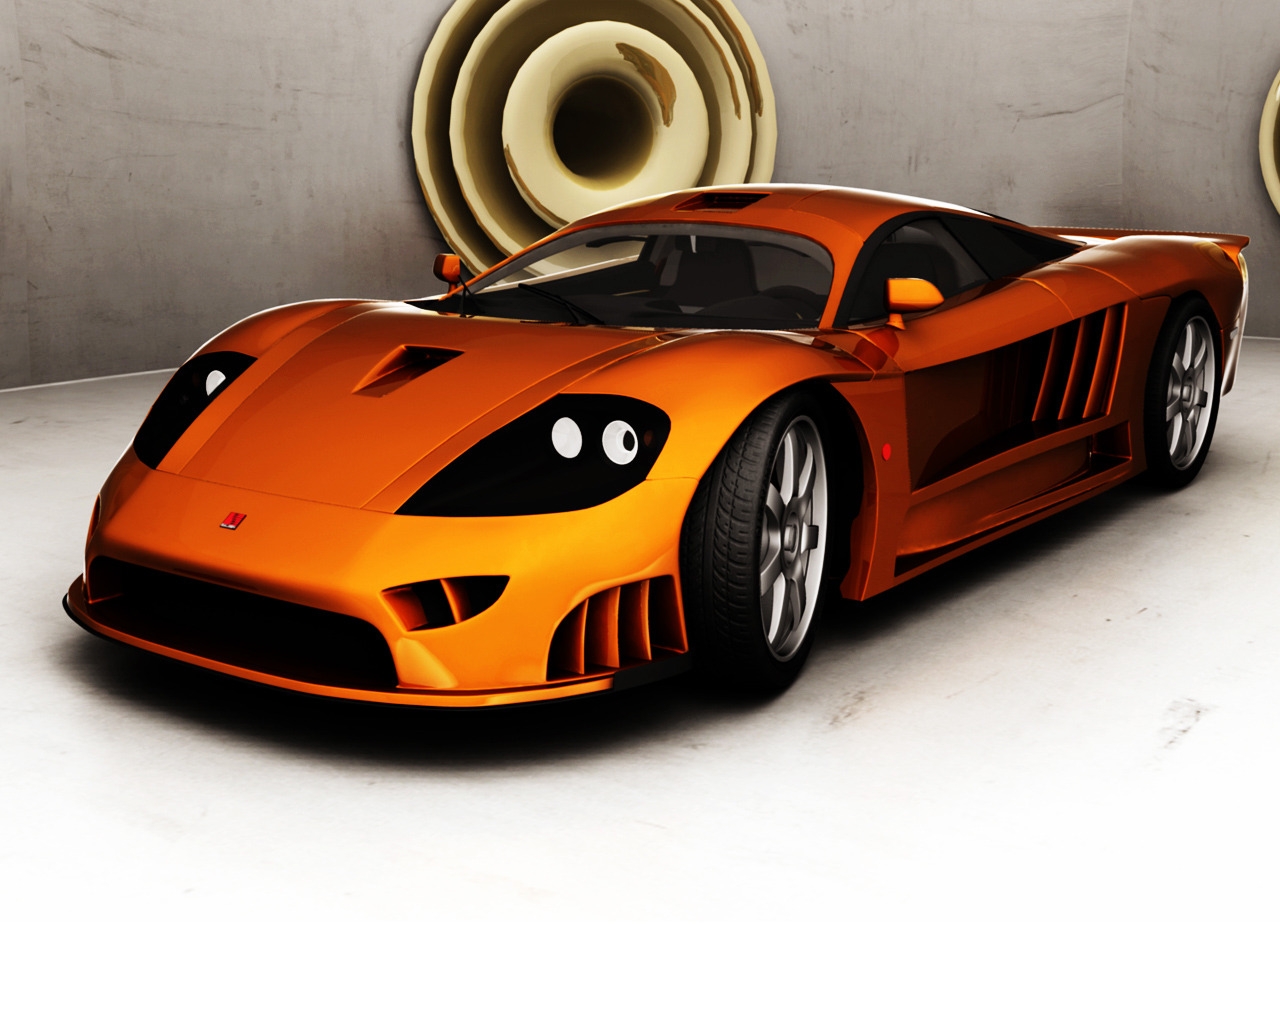 Saleen S7 Front for 1280 x 1024 resolution